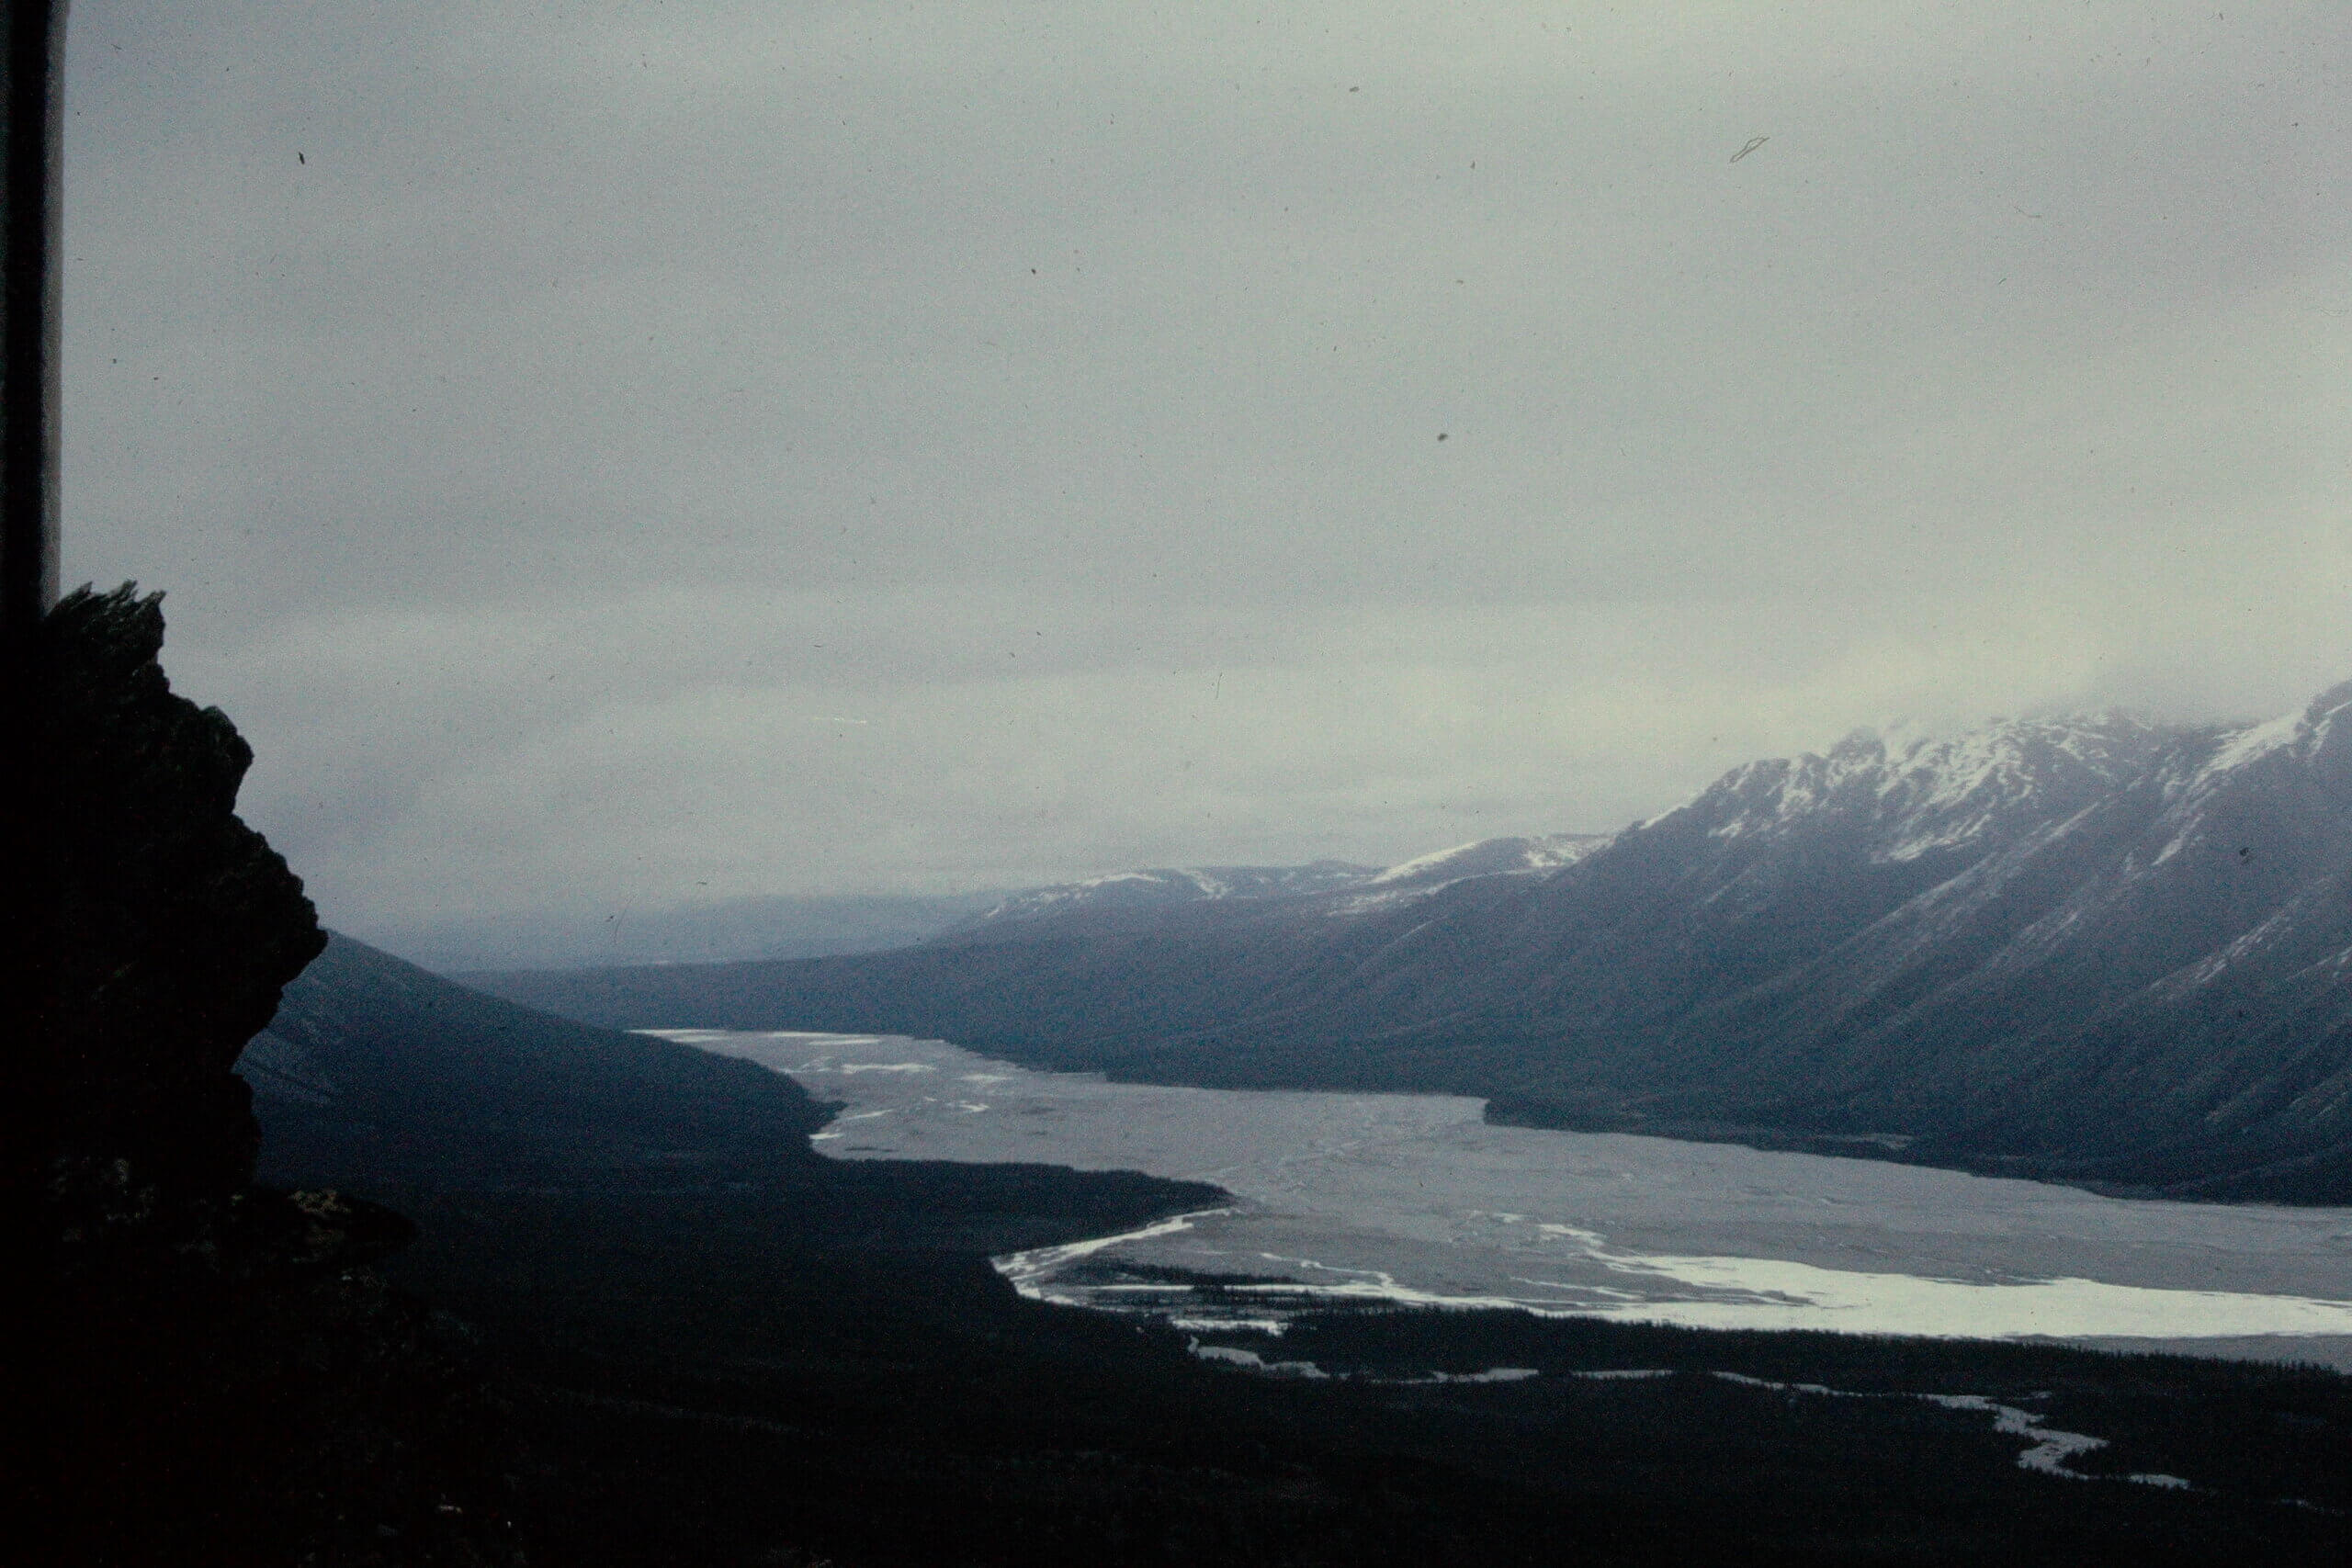 Gerstle River looking Northeast from the Granite Mountains - 1969